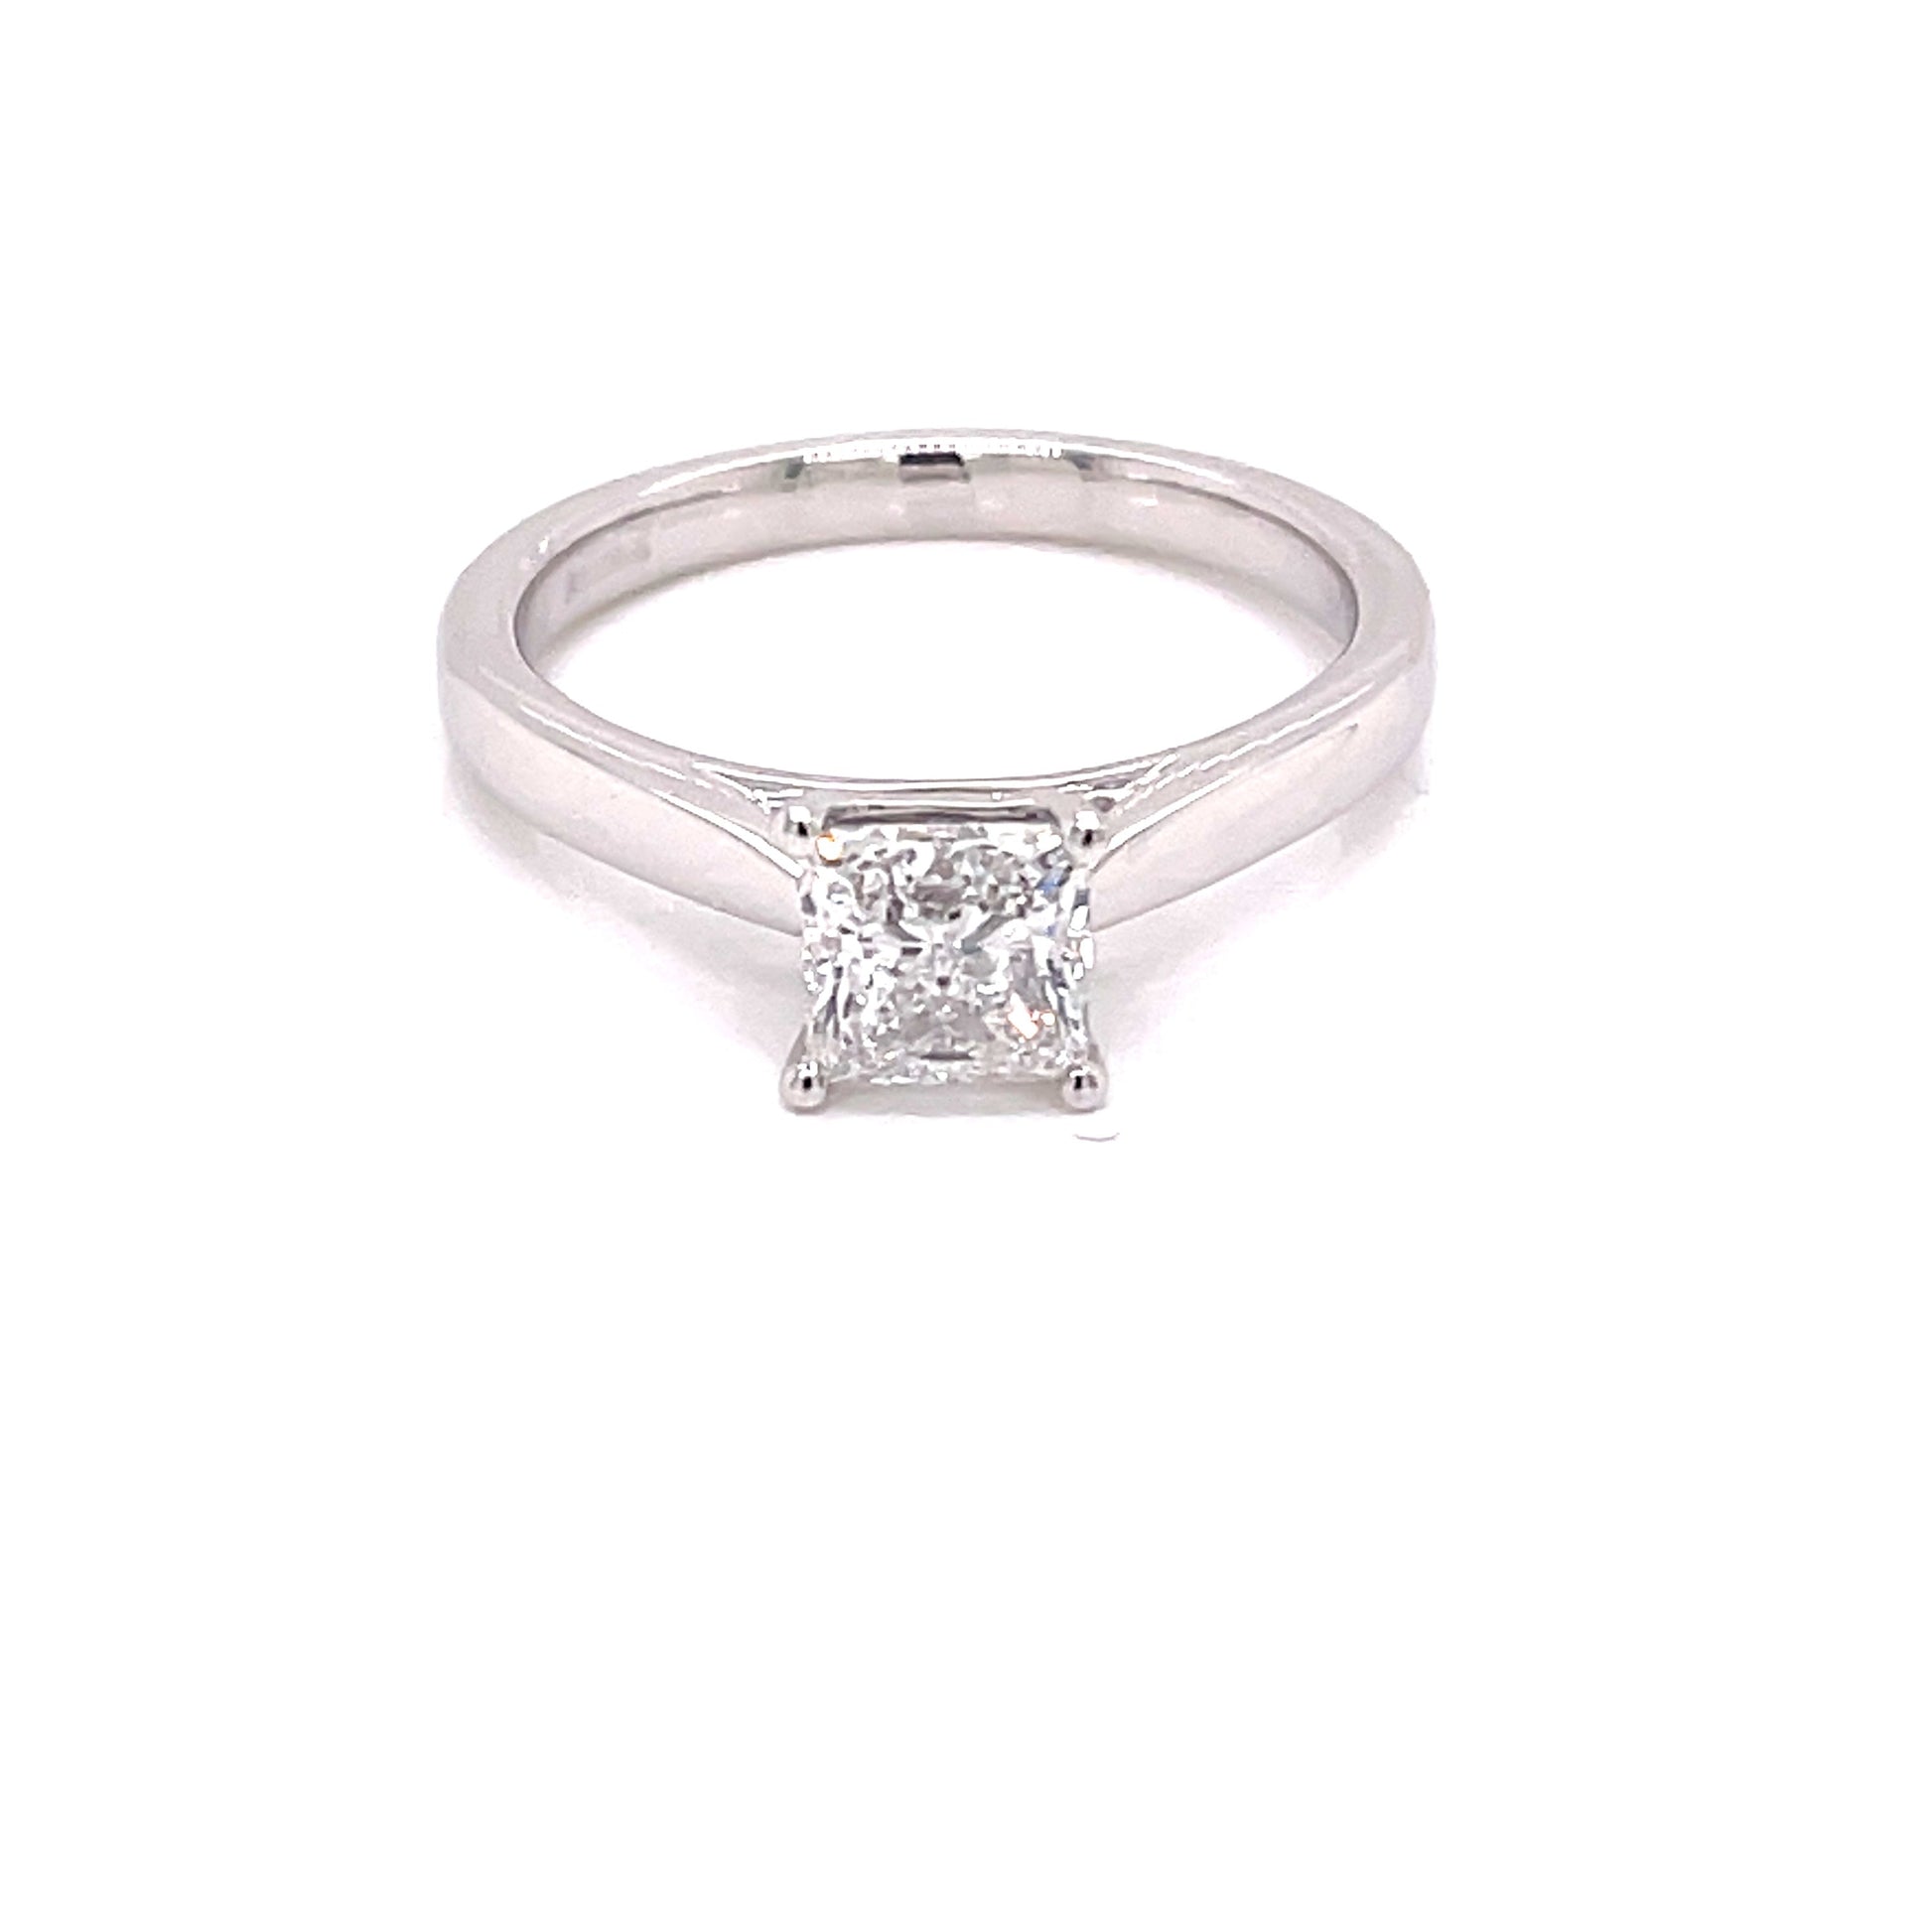 Princess Cut Diamond Solitaire Ring - 1.00cts  Gardiner Brothers   